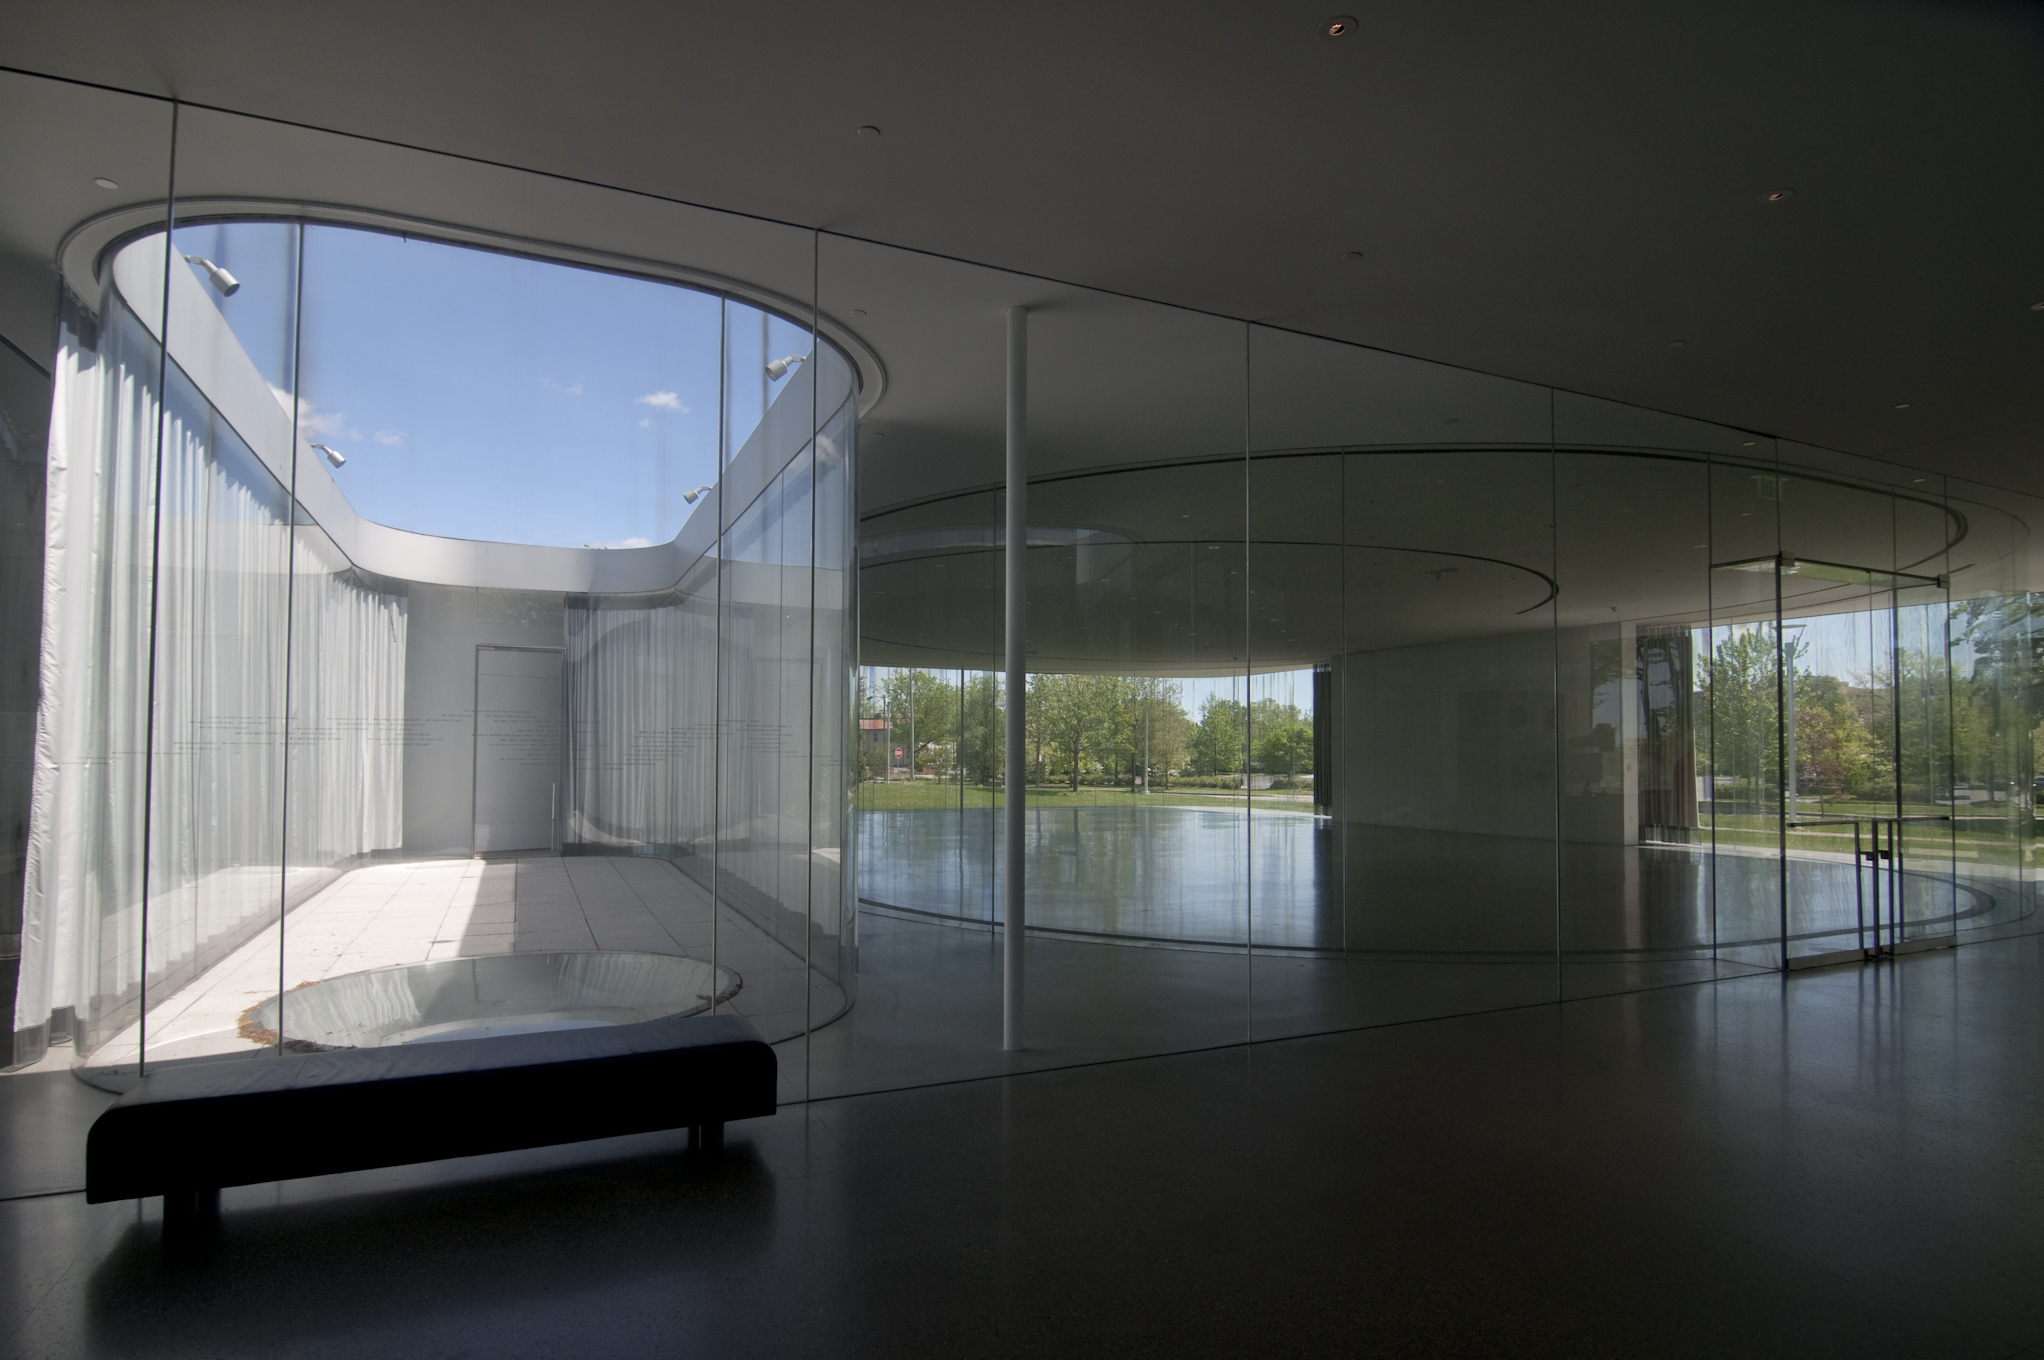 Interior Courtyard and GlasSalon at the Toledo Museum of Art Glass Pavilion Gallery by SANAA